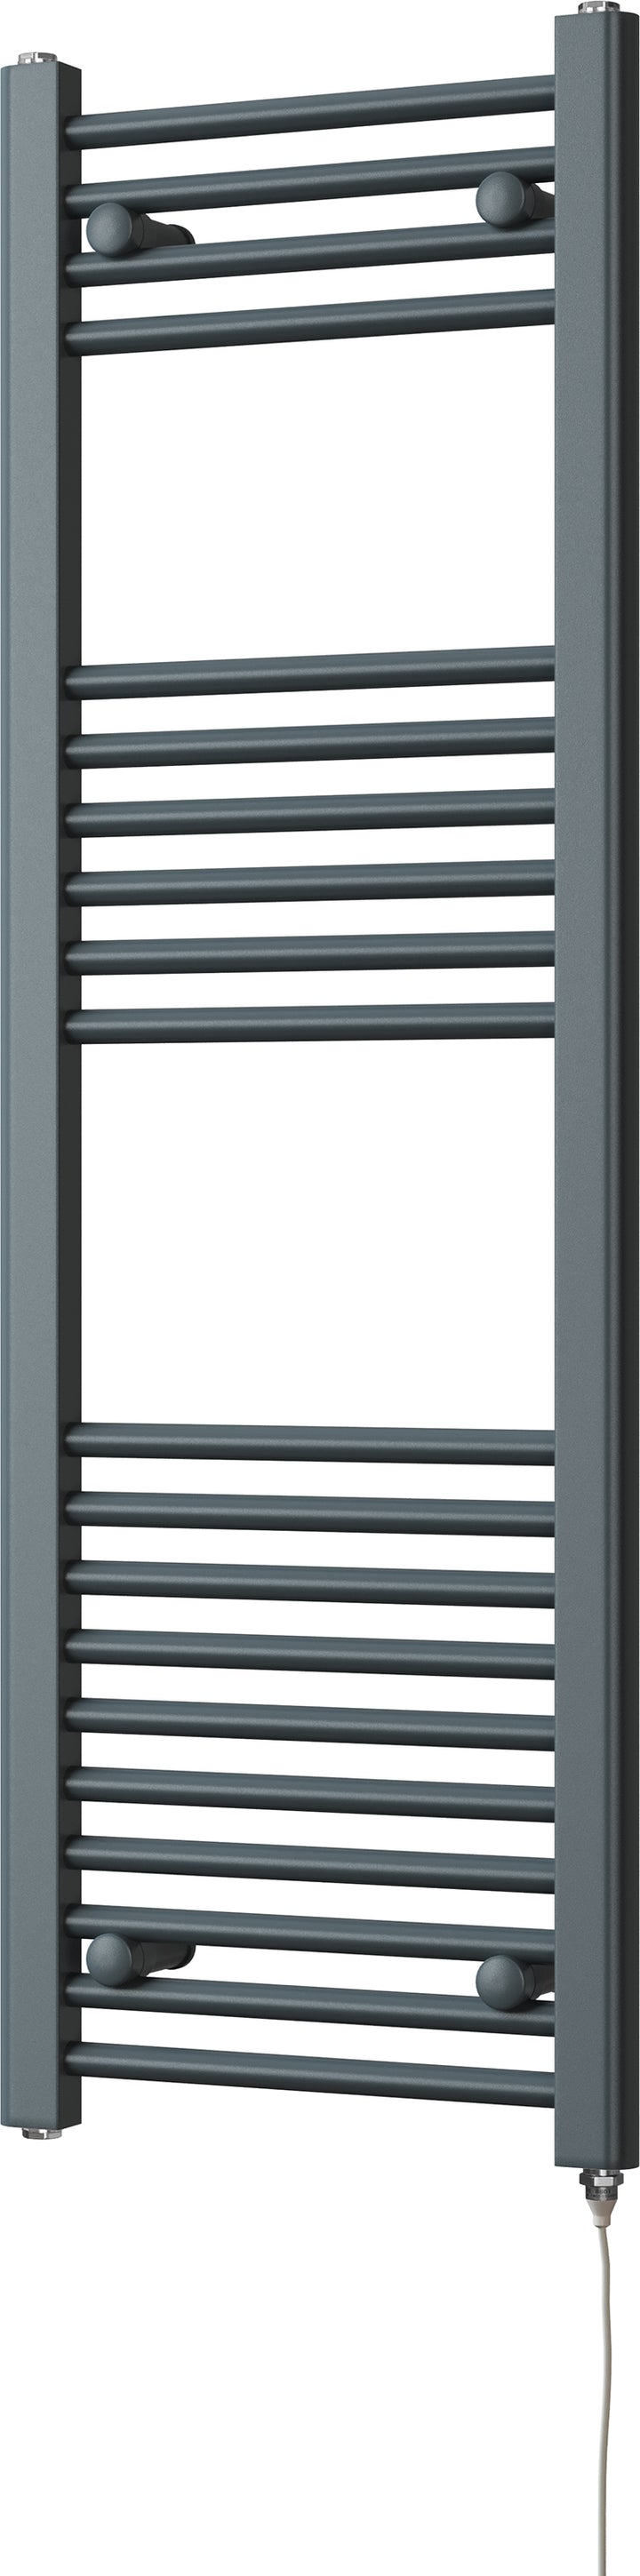 Zennor - Anthracite Electric Towel Rail H1200mm x W400mm Straight 400w Standard